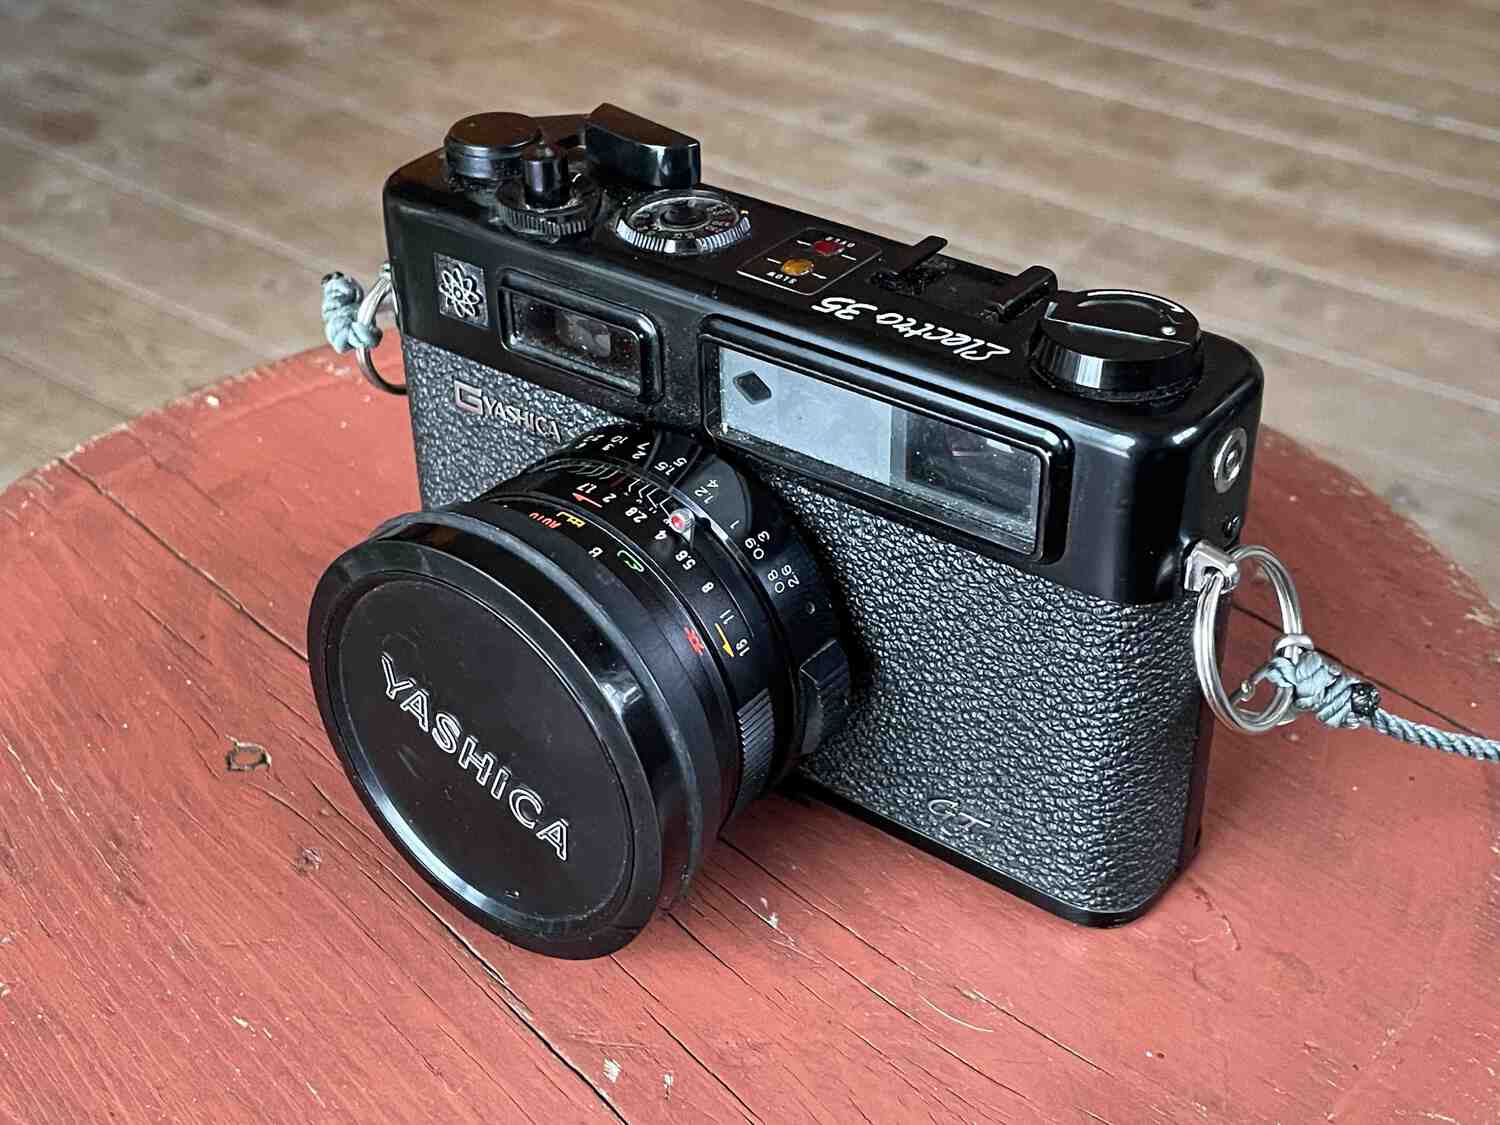 Yashica from the early 1970's.